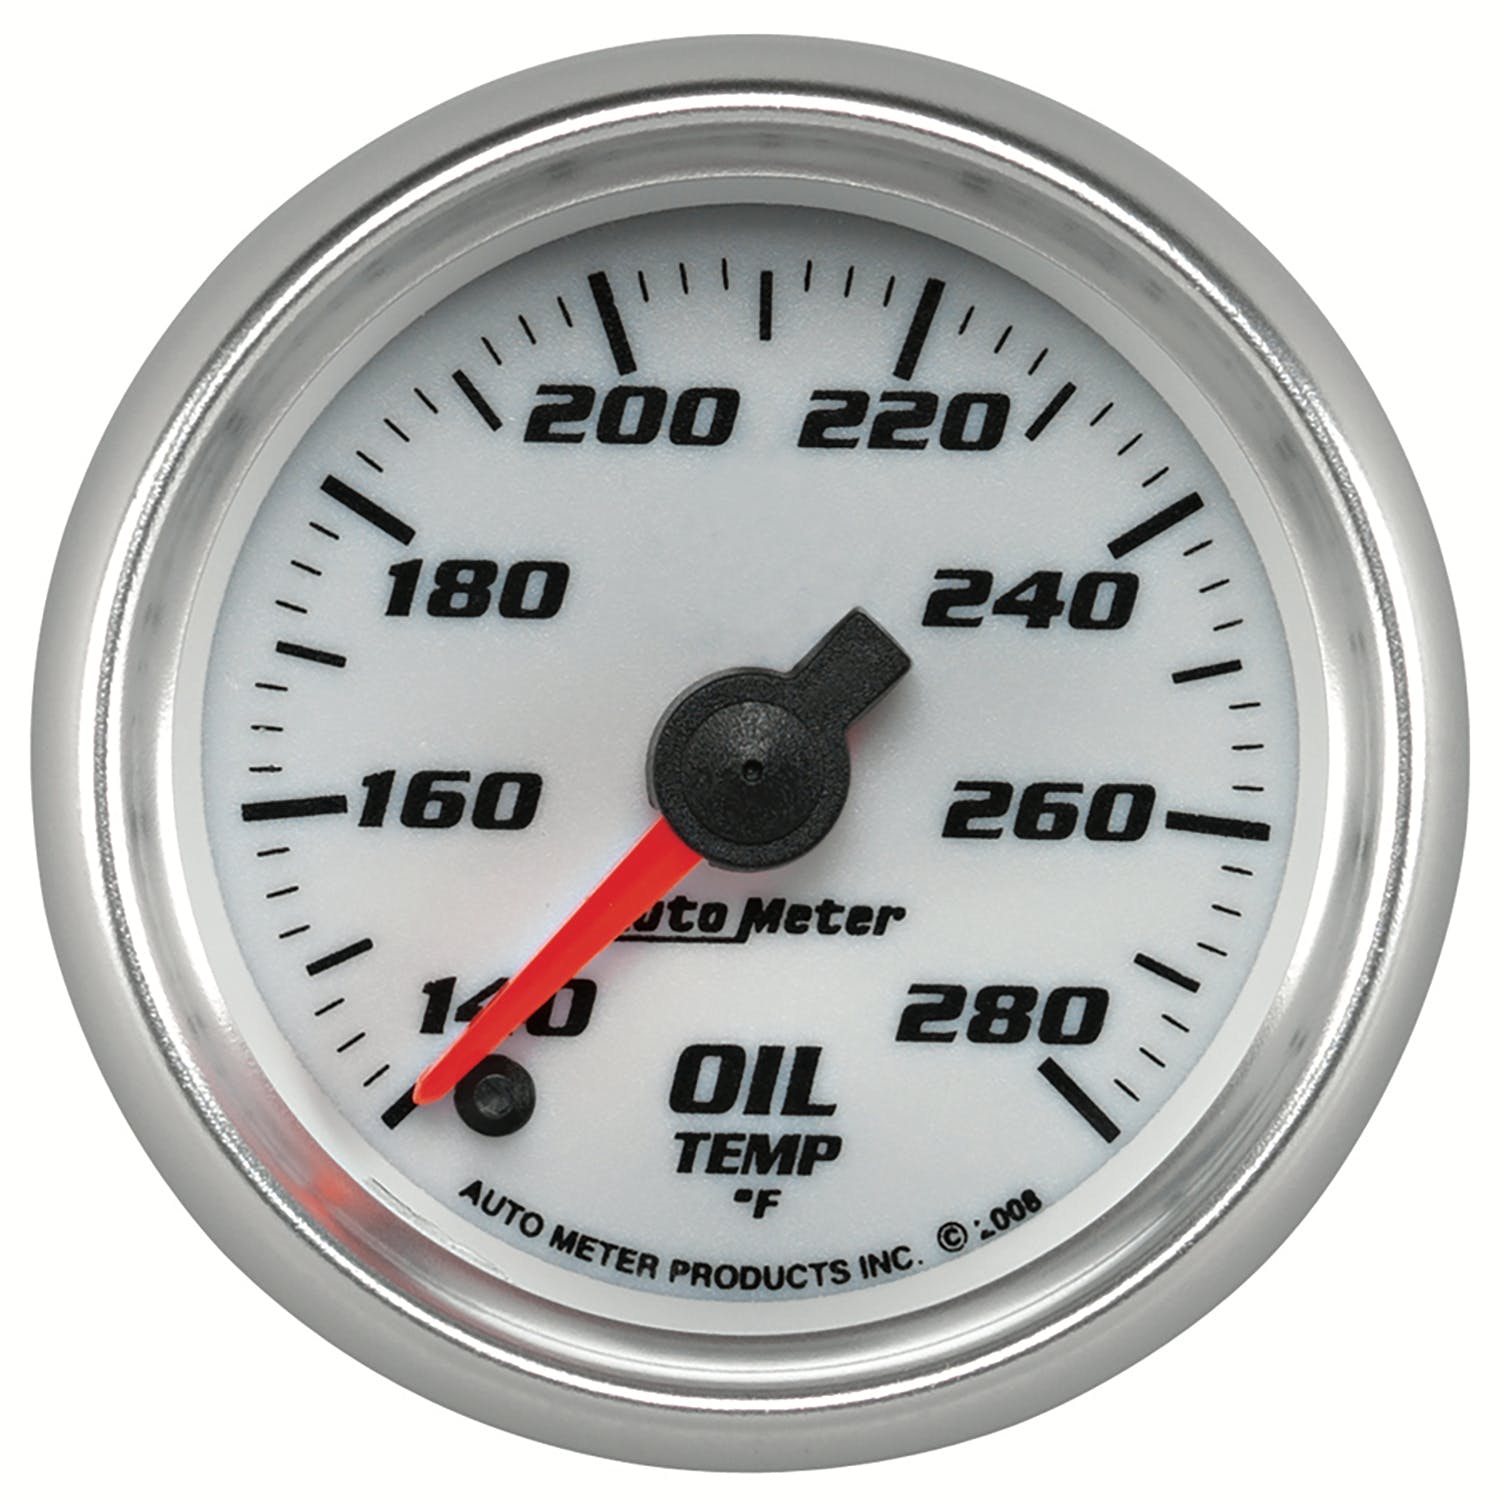 AutoMeter Products 19740 Oil Temperature Gauge, White-Pro Cycle 2 1/16 140-280° F Digital Stepper M